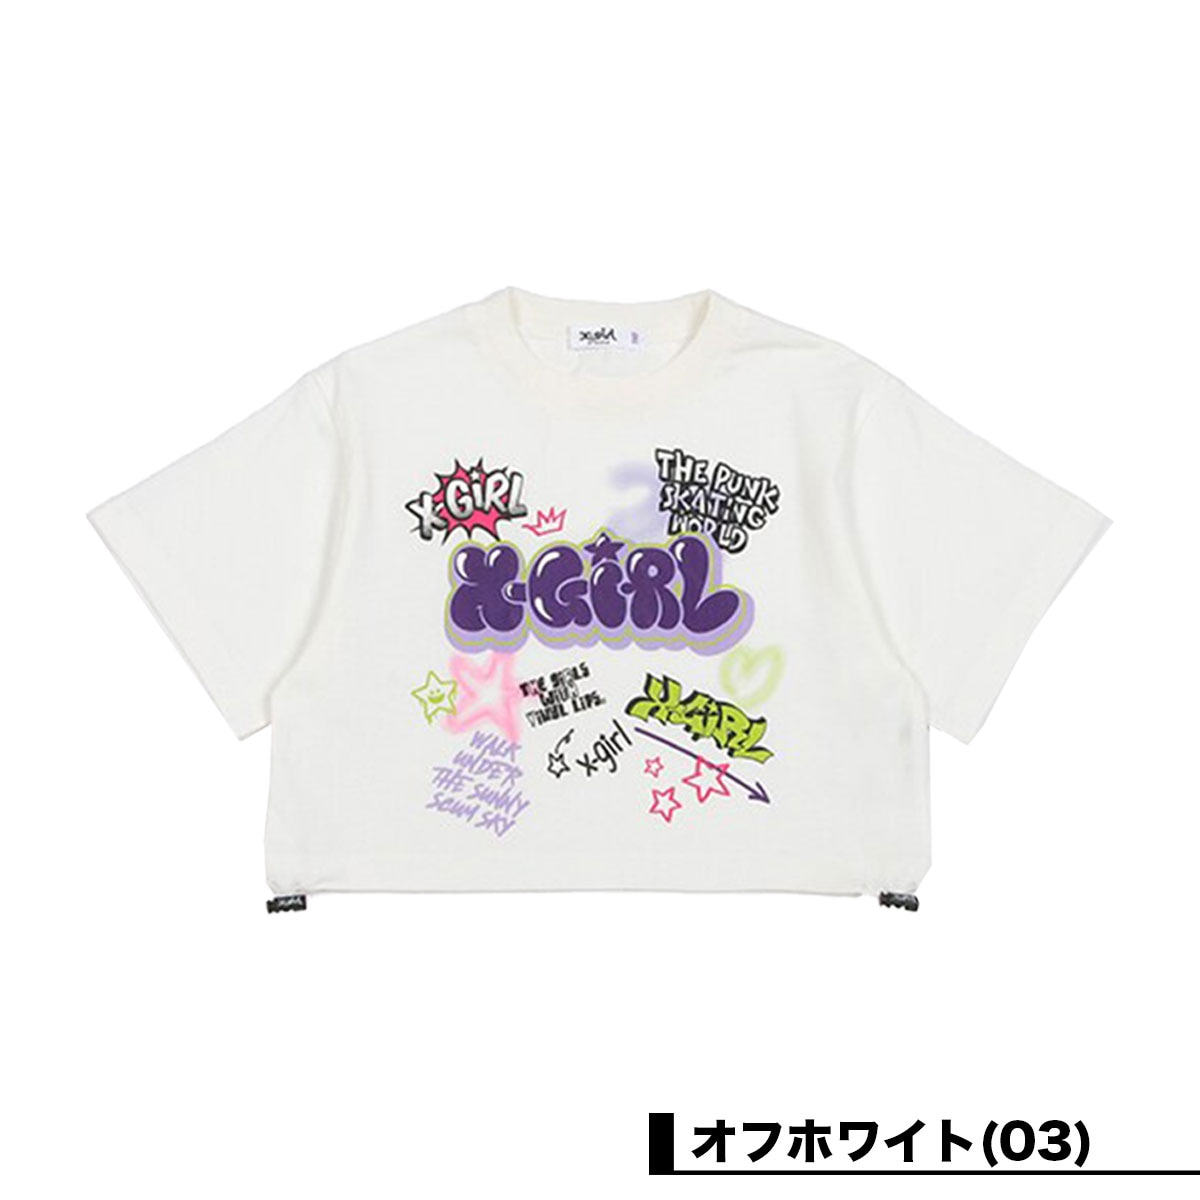 xgirl stages エックスガールステージス 半袖 Tシャツ トップス 全2色 